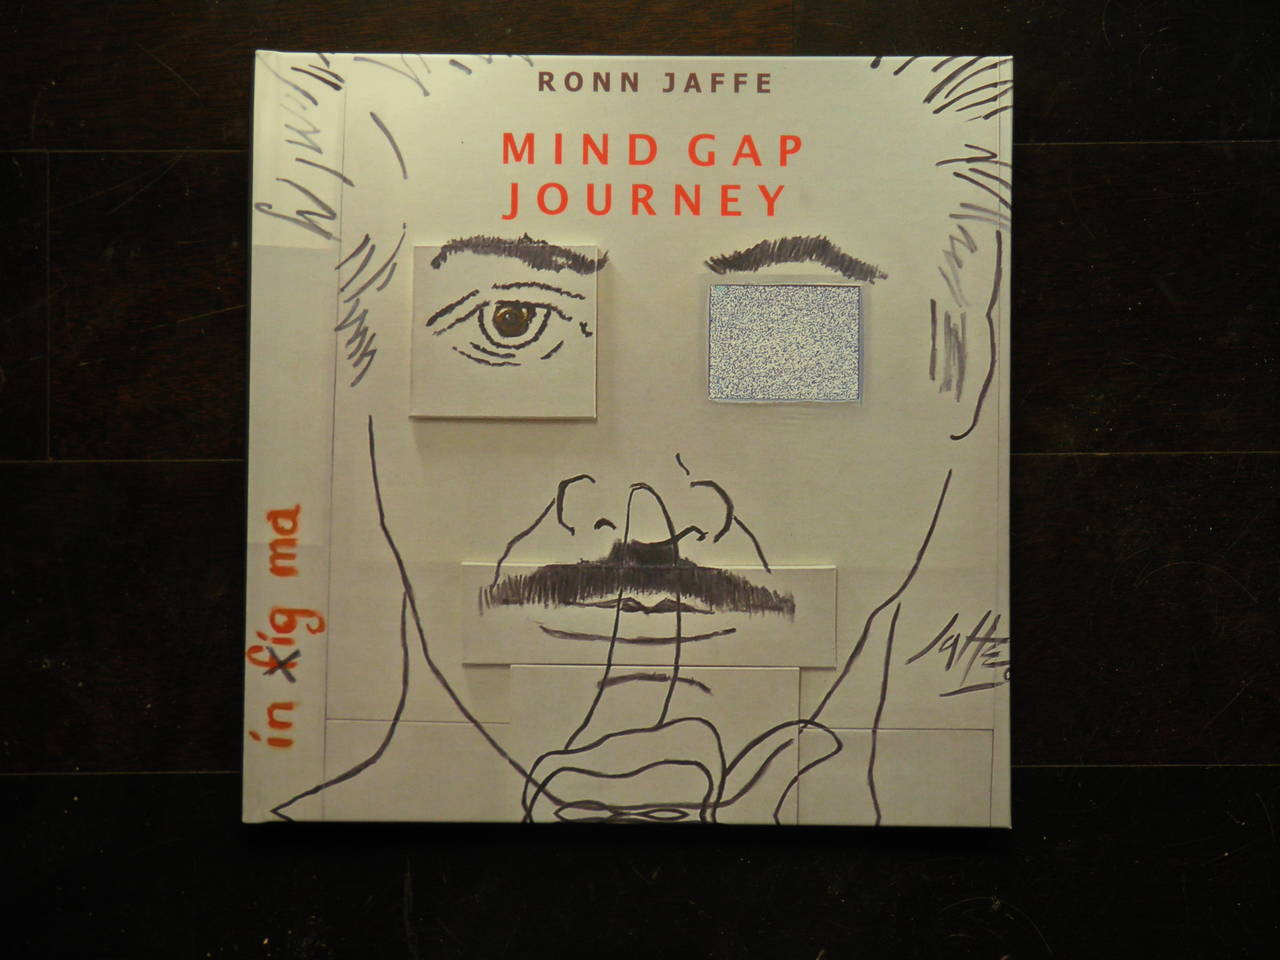 Get a Copy of the Monograph of Noted Artist Ronn Jaffe- 'MIND GAP JOURNEY 21C.'-- 89 Pages of RJ Cutting Contemporary Conceptual Art and Design Photos including RJ's Poetry--soft cover- limited edition of 25. written by Dr. Wyatt Jaffe 
Noted